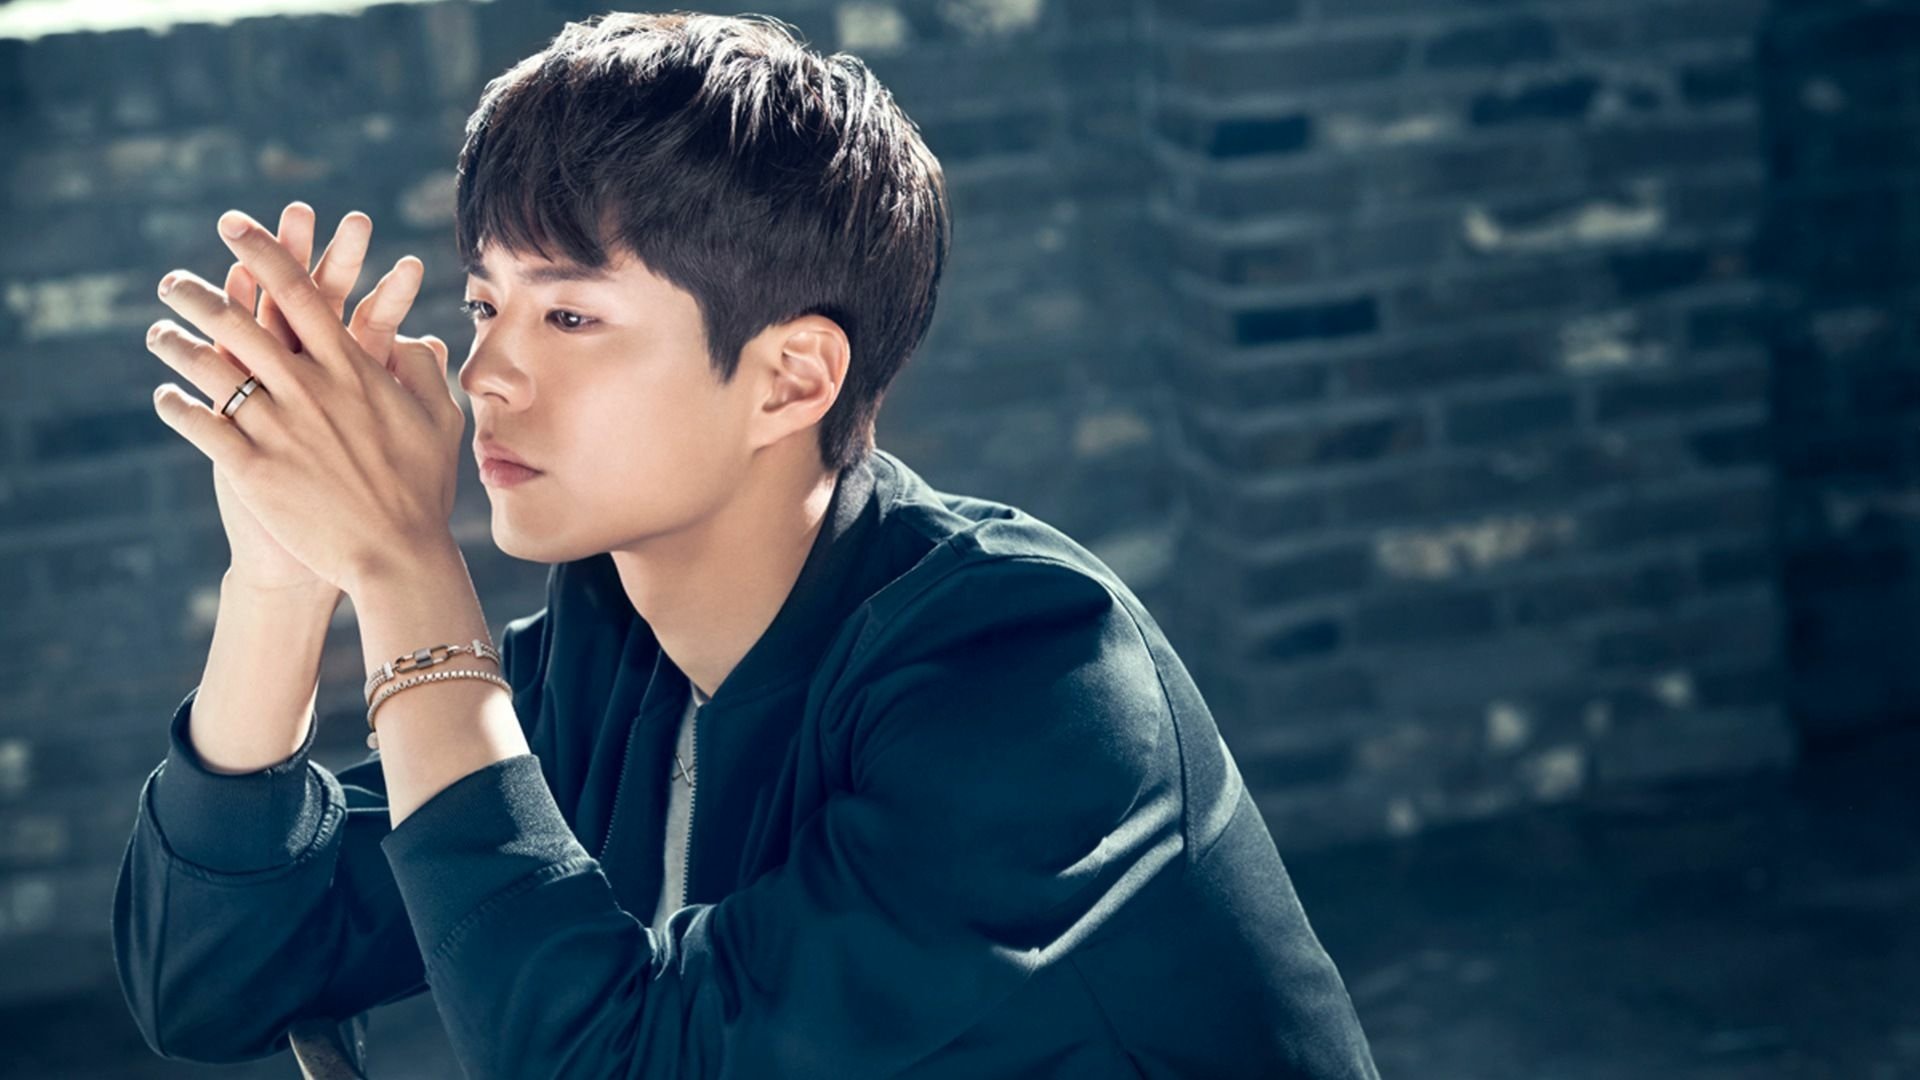 736 Park Bo Gum Photos & High Res Pictures - Getty Images